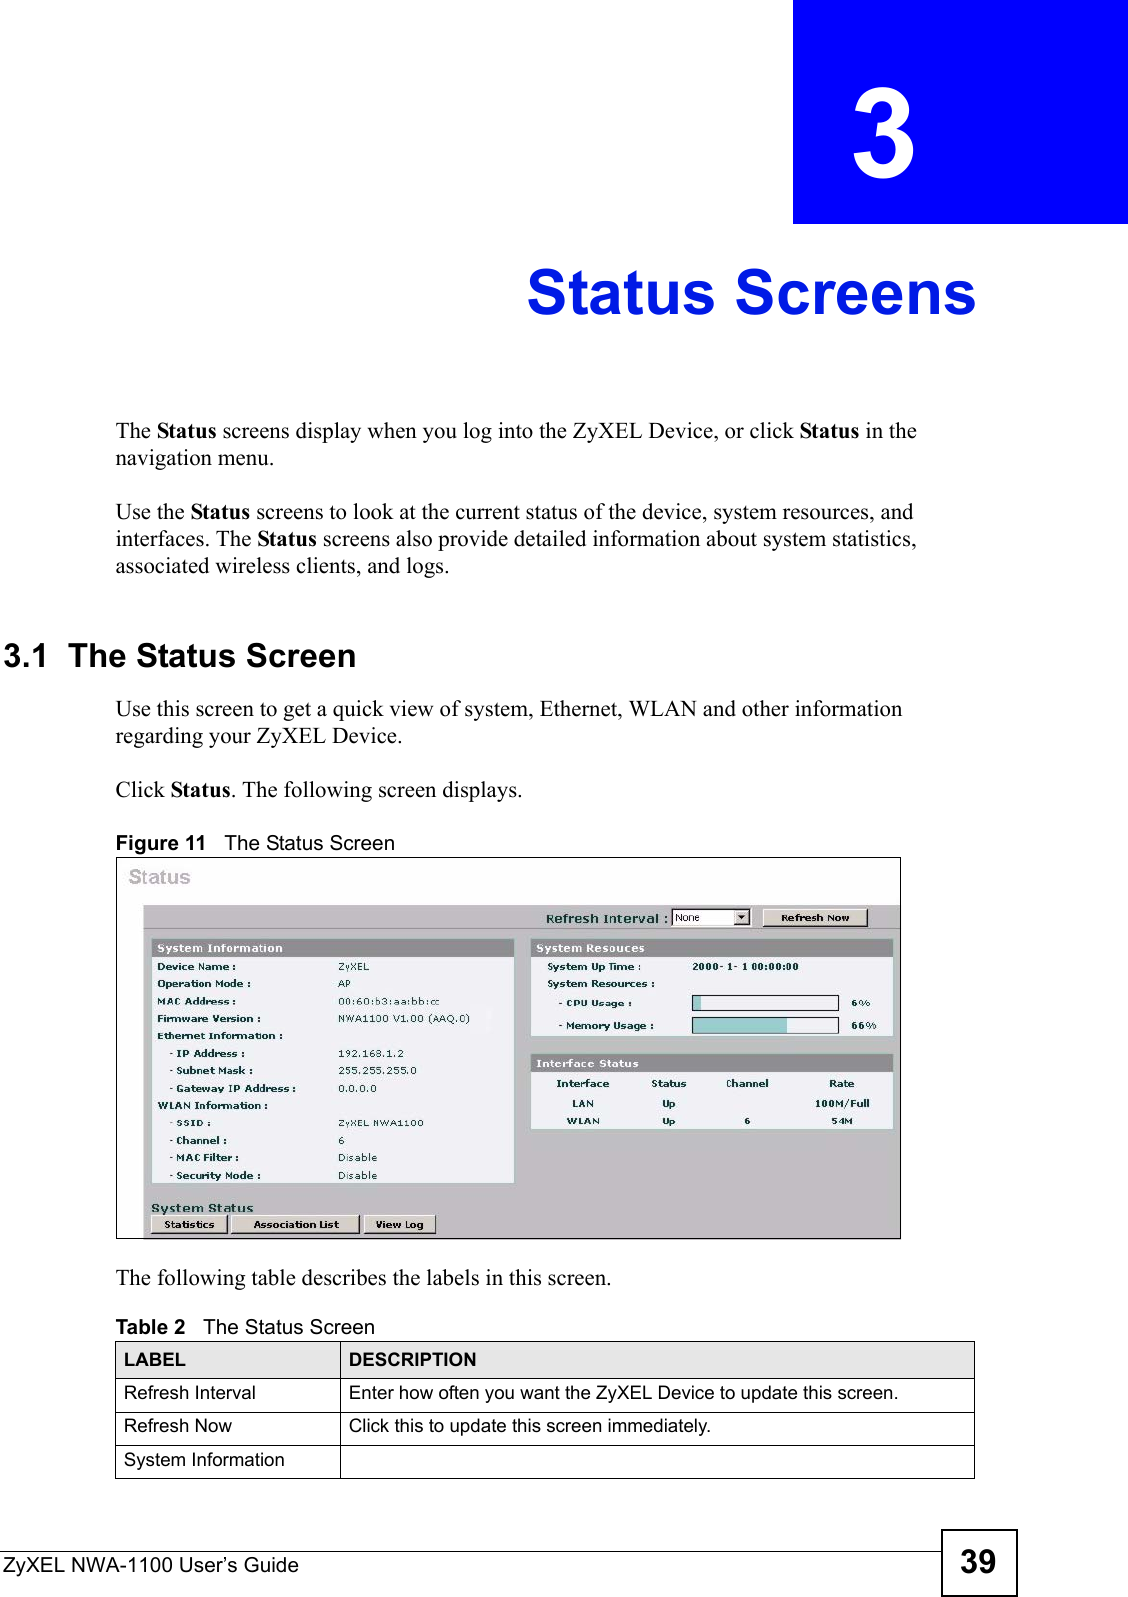 ZyXEL NWA-1100 User’s Guide 39CHAPTER  3 Status ScreensThe Status screens display when you log into the ZyXEL Device, or click Status in the navigation menu.Use the Status screens to look at the current status of the device, system resources, and interfaces. The Status screens also provide detailed information about system statistics, associated wireless clients, and logs.3.1  The Status ScreenUse this screen to get a quick view of system, Ethernet, WLAN and other information regarding your ZyXEL Device. Click Status. The following screen displays.Figure 11   The Status ScreenThe following table describes the labels in this screen.Table 2   The Status ScreenLABEL DESCRIPTIONRefresh Interval Enter how often you want the ZyXEL Device to update this screen.Refresh Now Click this to update this screen immediately.System Information